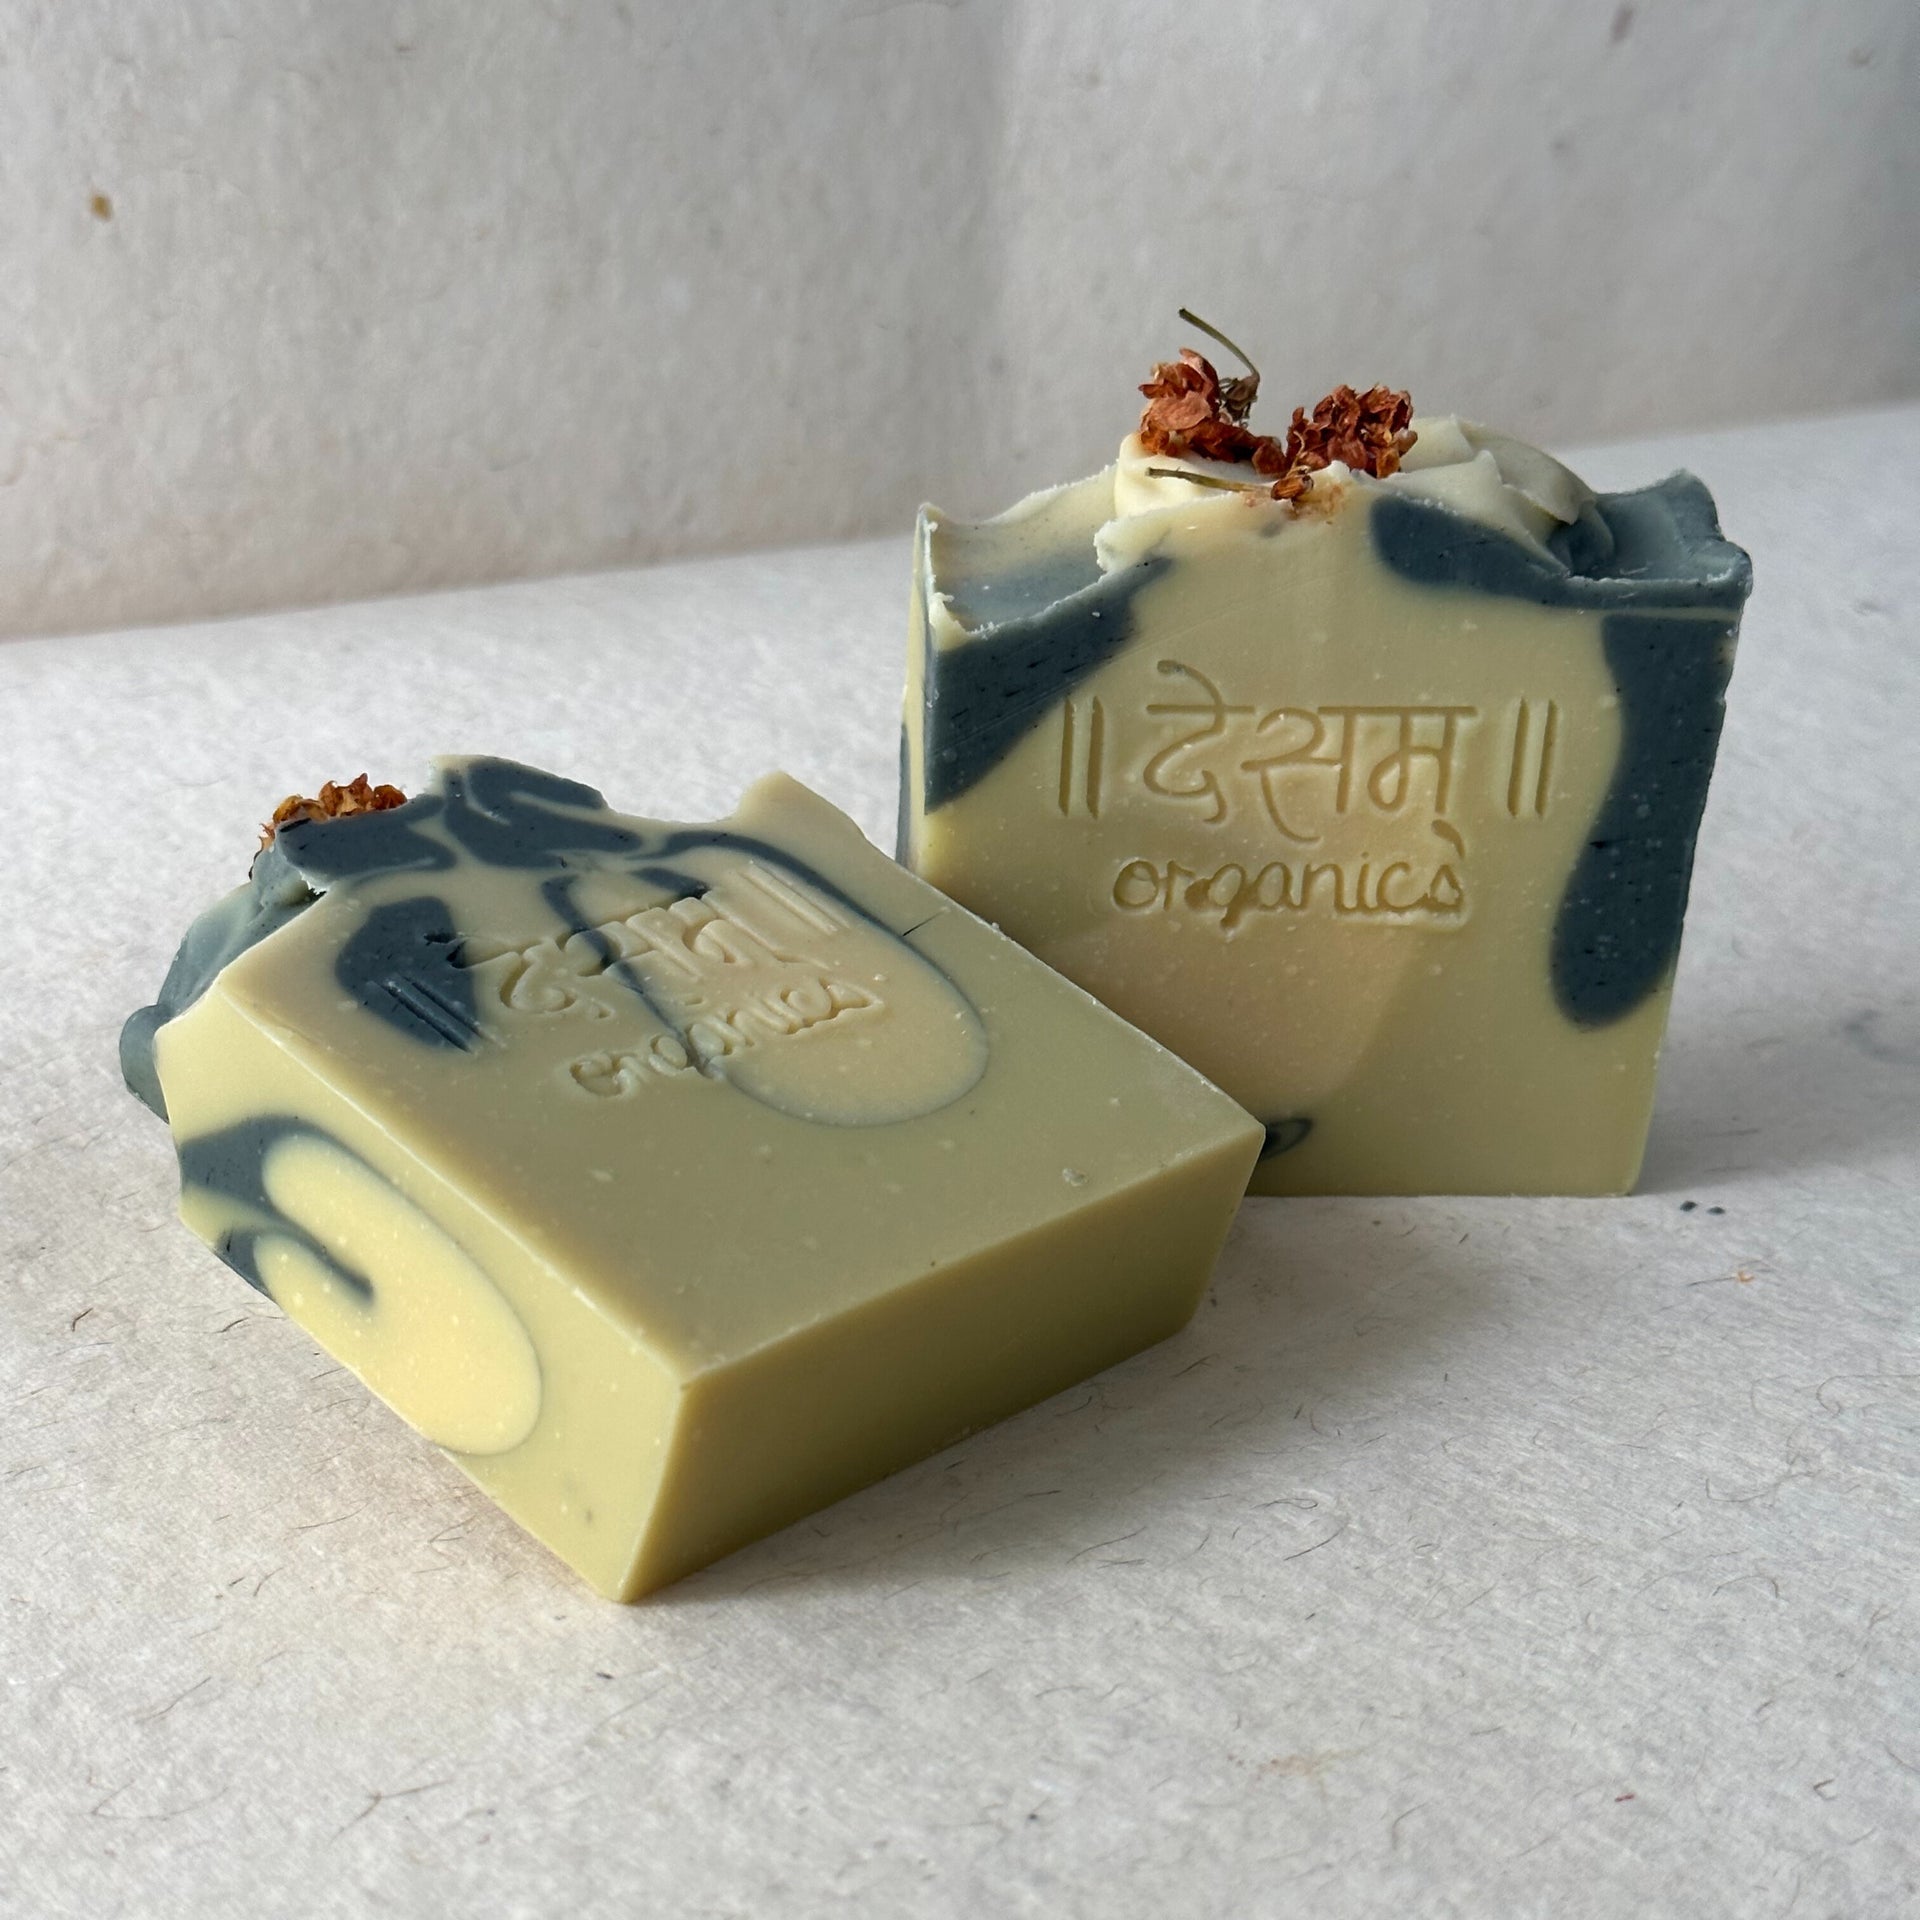 Cold-Processed Soap Bars